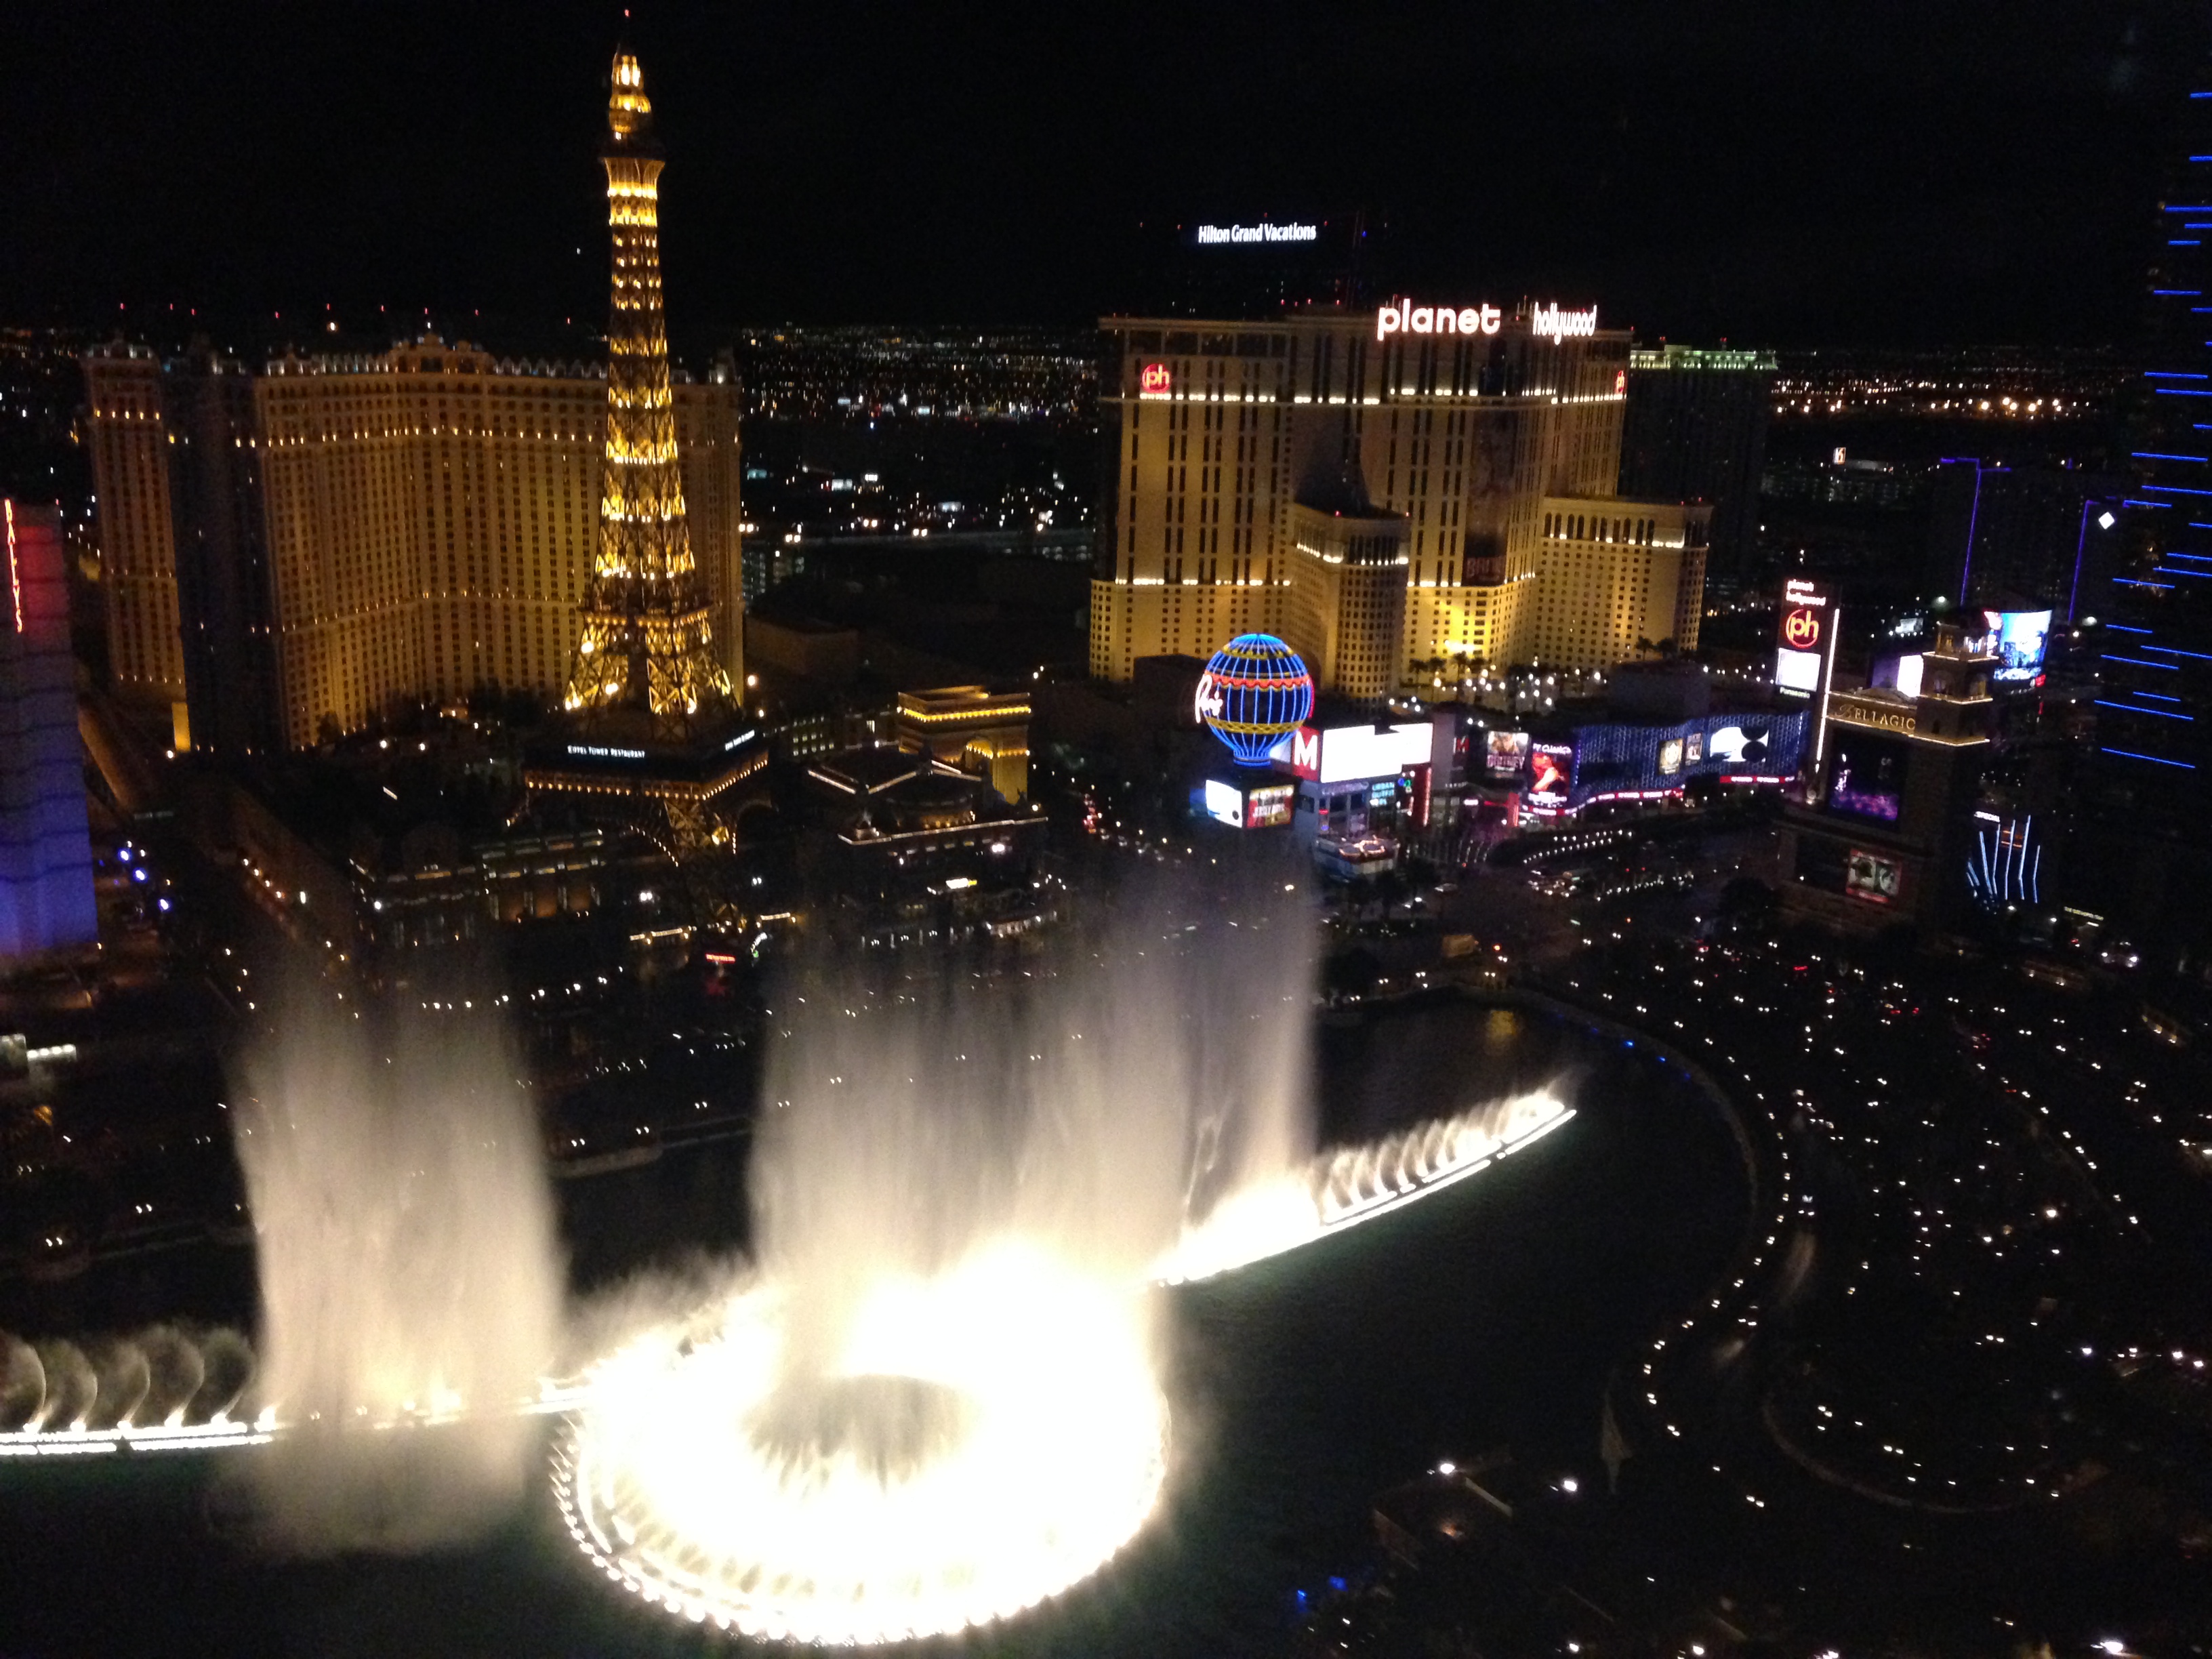 How We Got A Penthouse Suite At The Bellagio With The 20 Trick